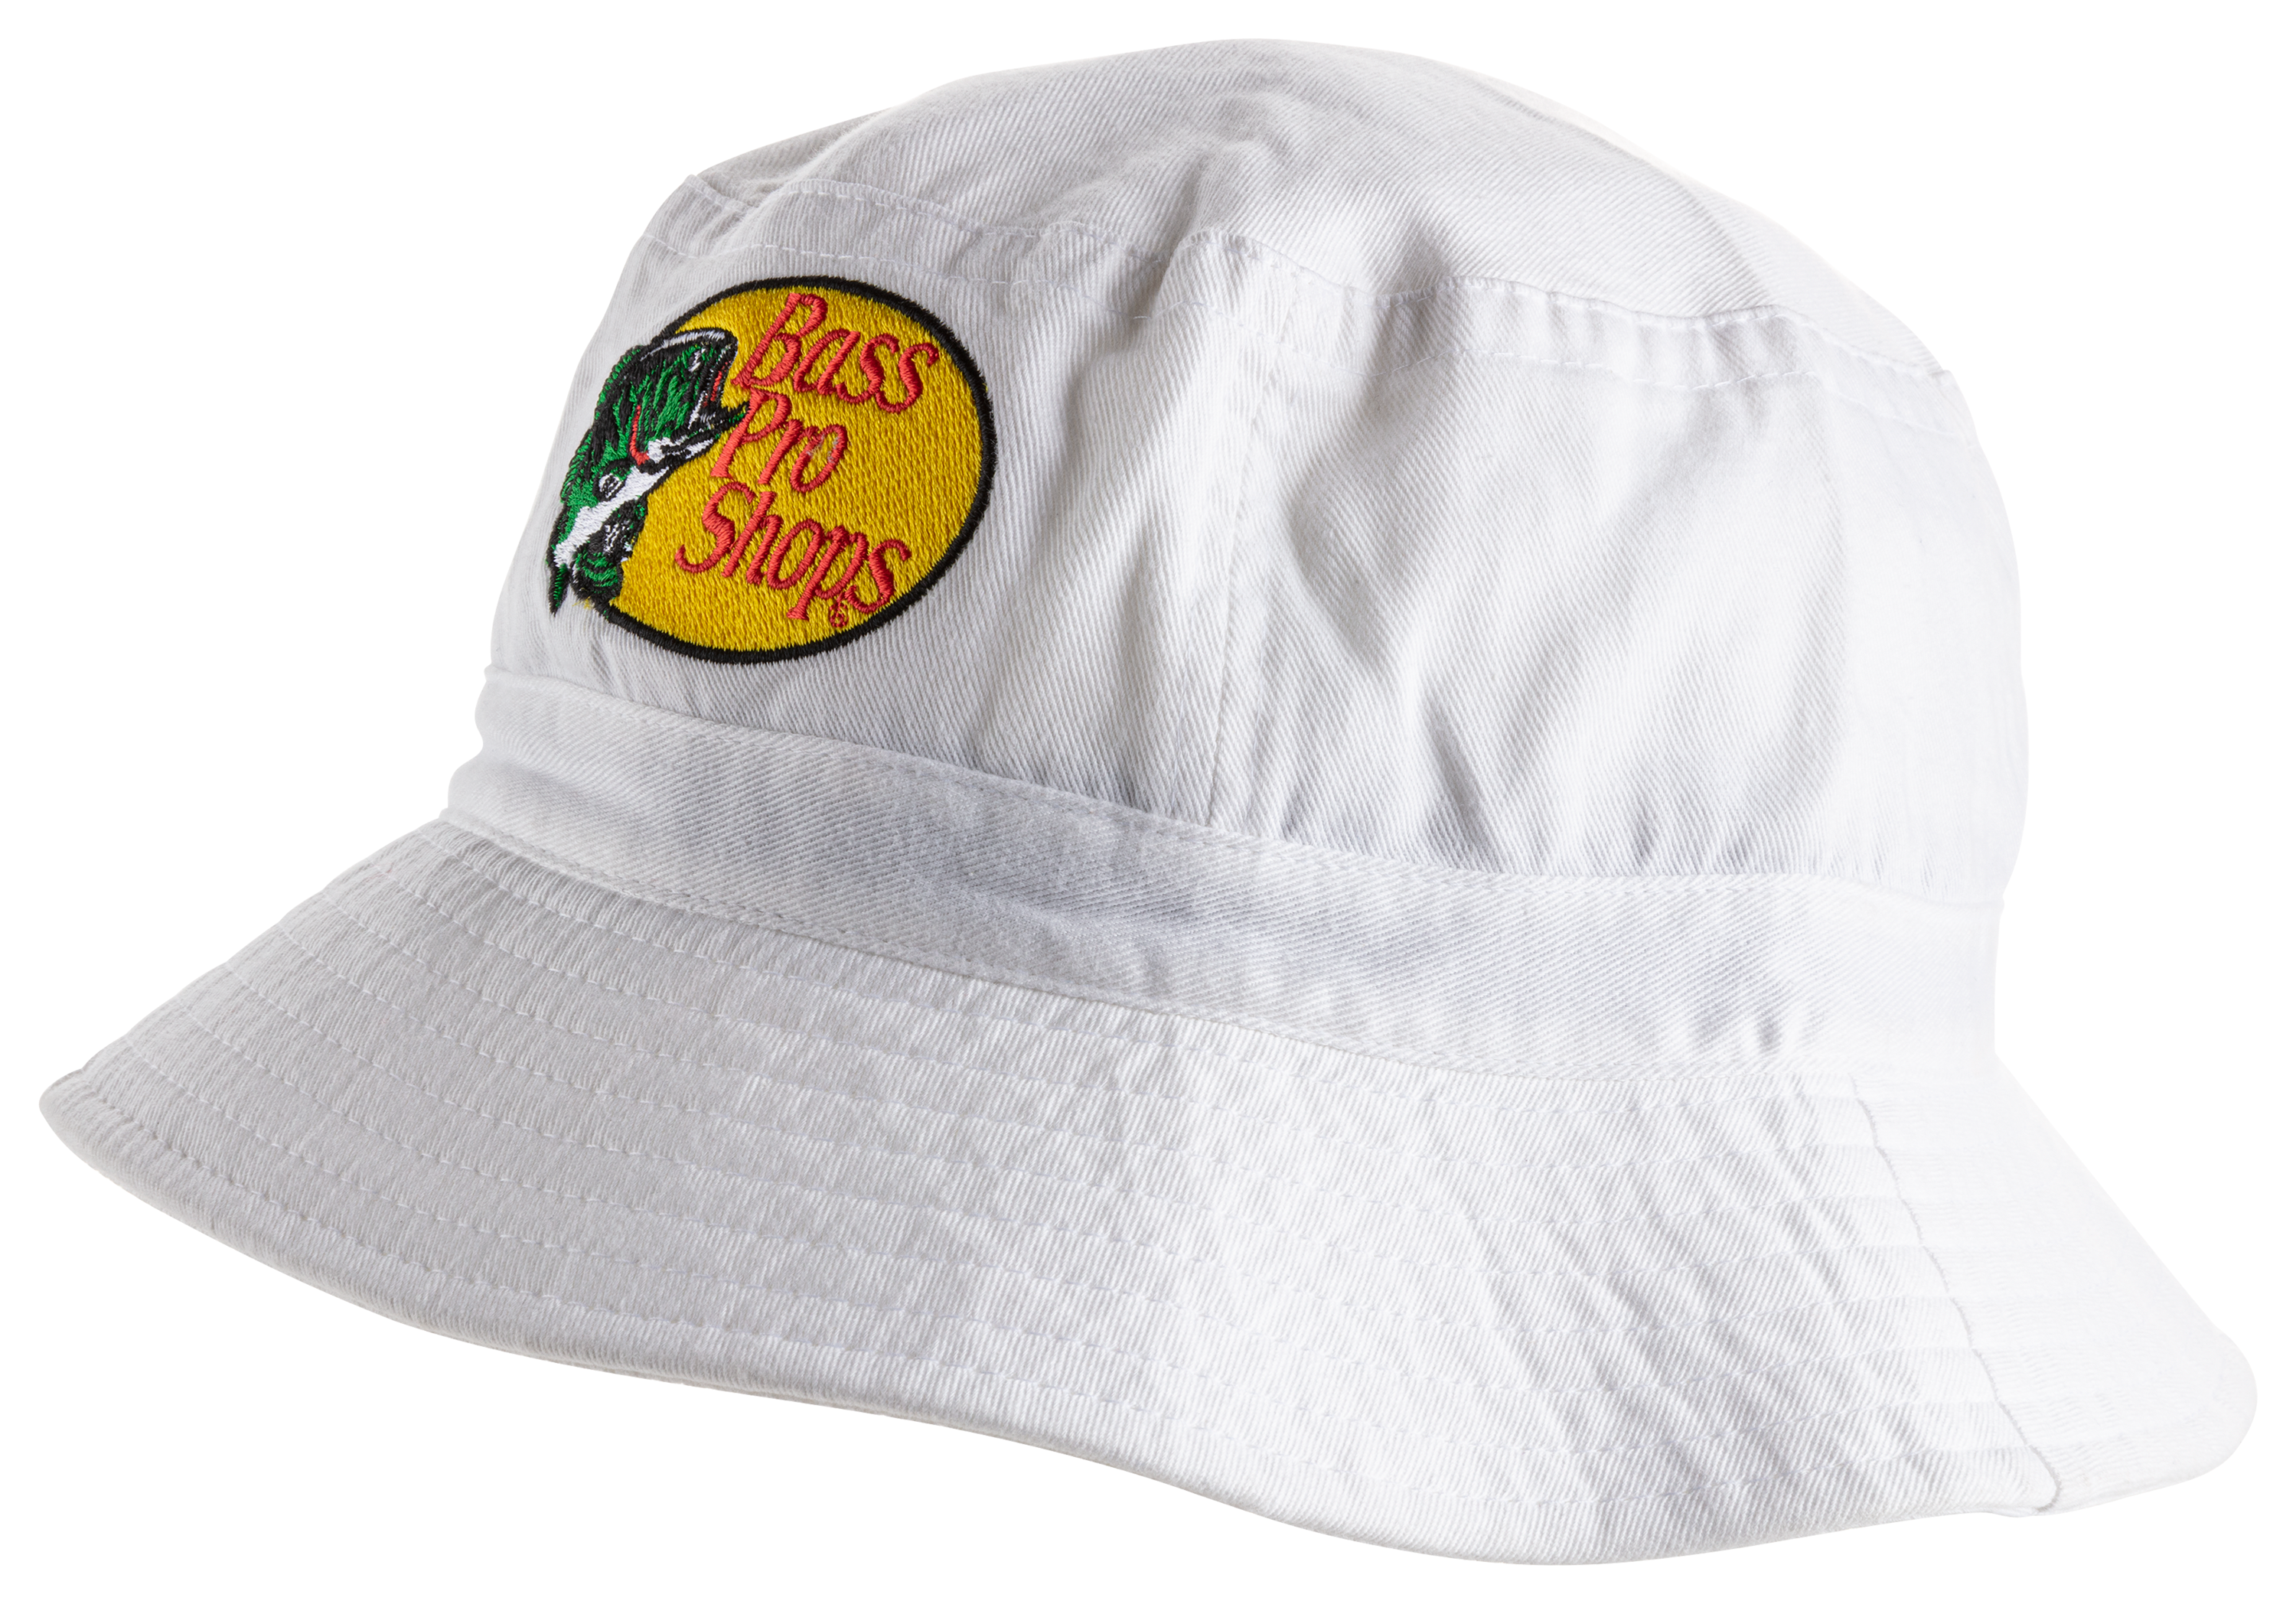 Bass Fishing Productions Merch BFP Redtail Bucket Hat for Sale